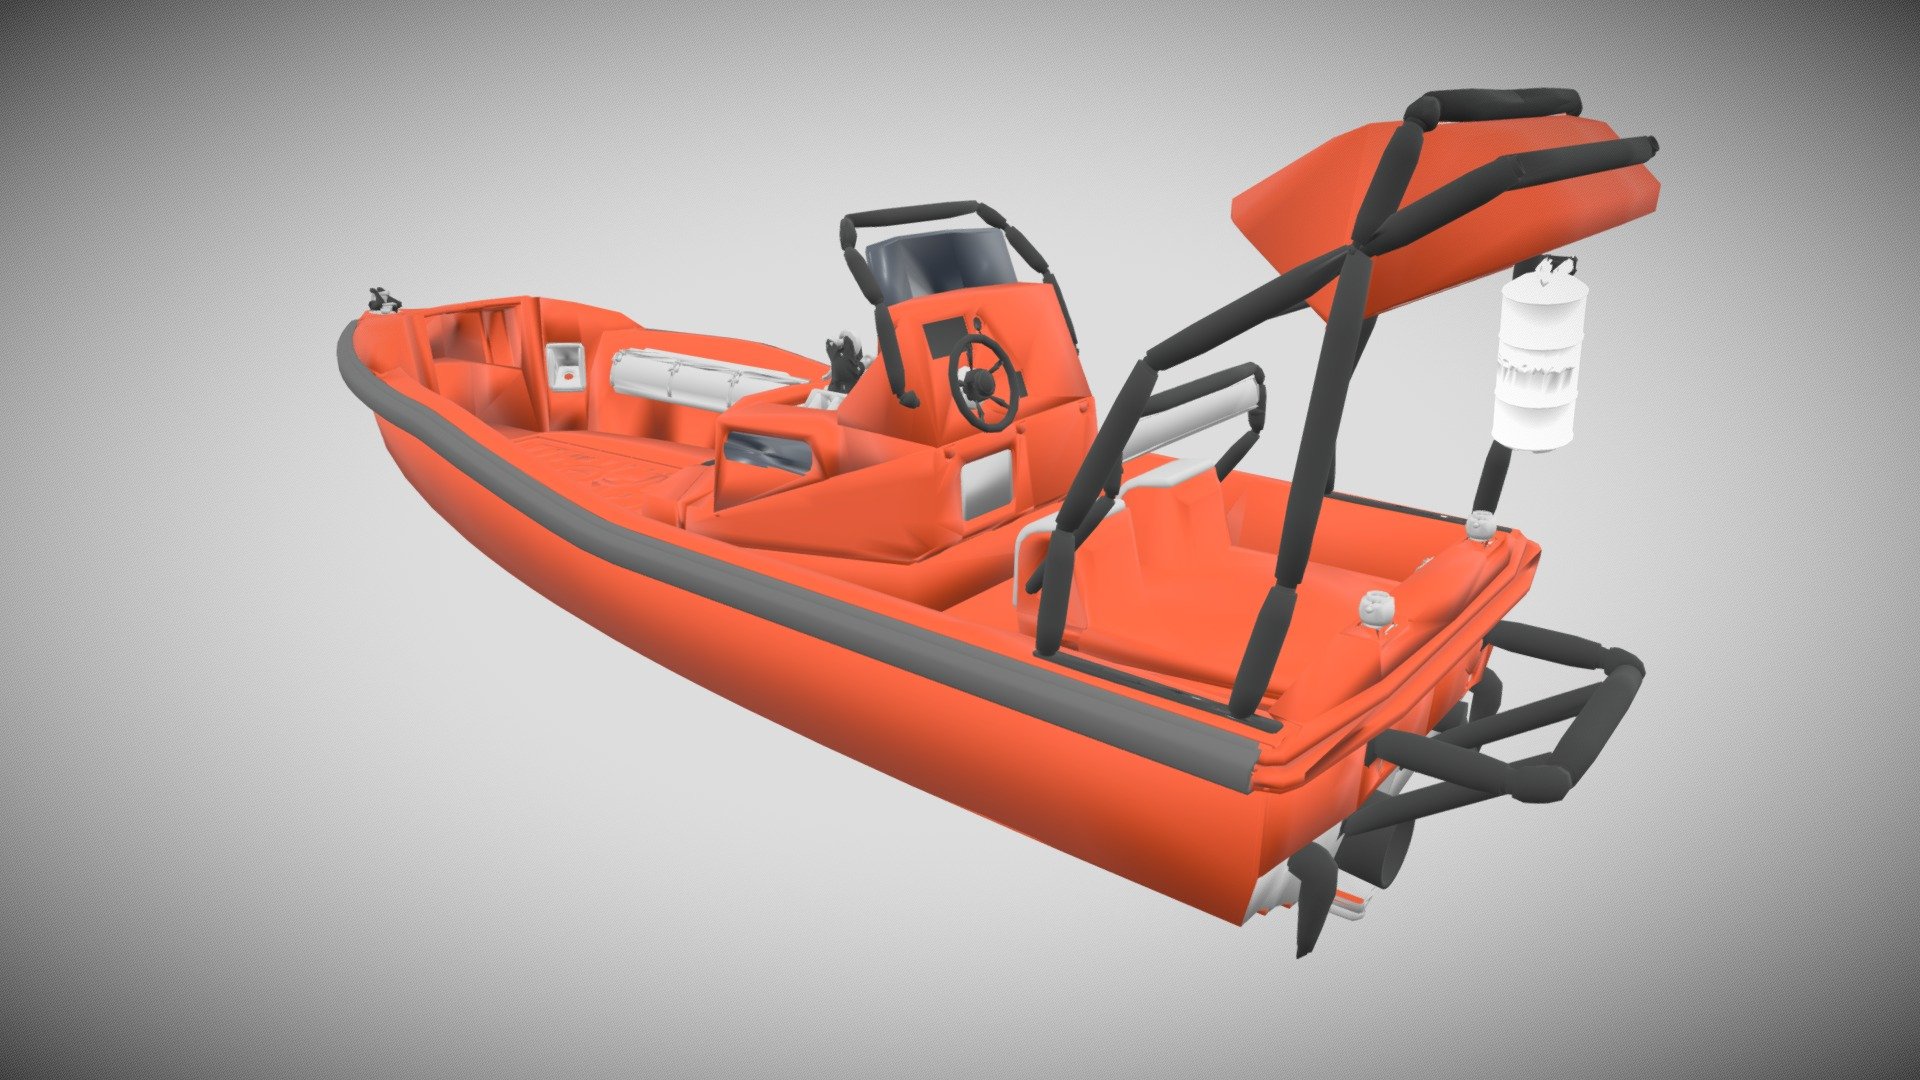 FAST RESCUE BOAT resembling FRSQ 630
Glass reinforced plastic hull
Capacity for 15 people including one laying on a stretcher
Standard supplied with Heavy duty D-section fendering
Embarkation steps integrated in the boat underneath the openable boat sprayhood
Easy access to all service points
Helmstand designed for safety and excellent ergonomics
Inboard diesel engine with waterjet propulsion
Self-righting bag and foam fenders - Offshore Fast Resque boat - Buy Royalty Free 3D model by R3D Reality (@redonemart) 3d model